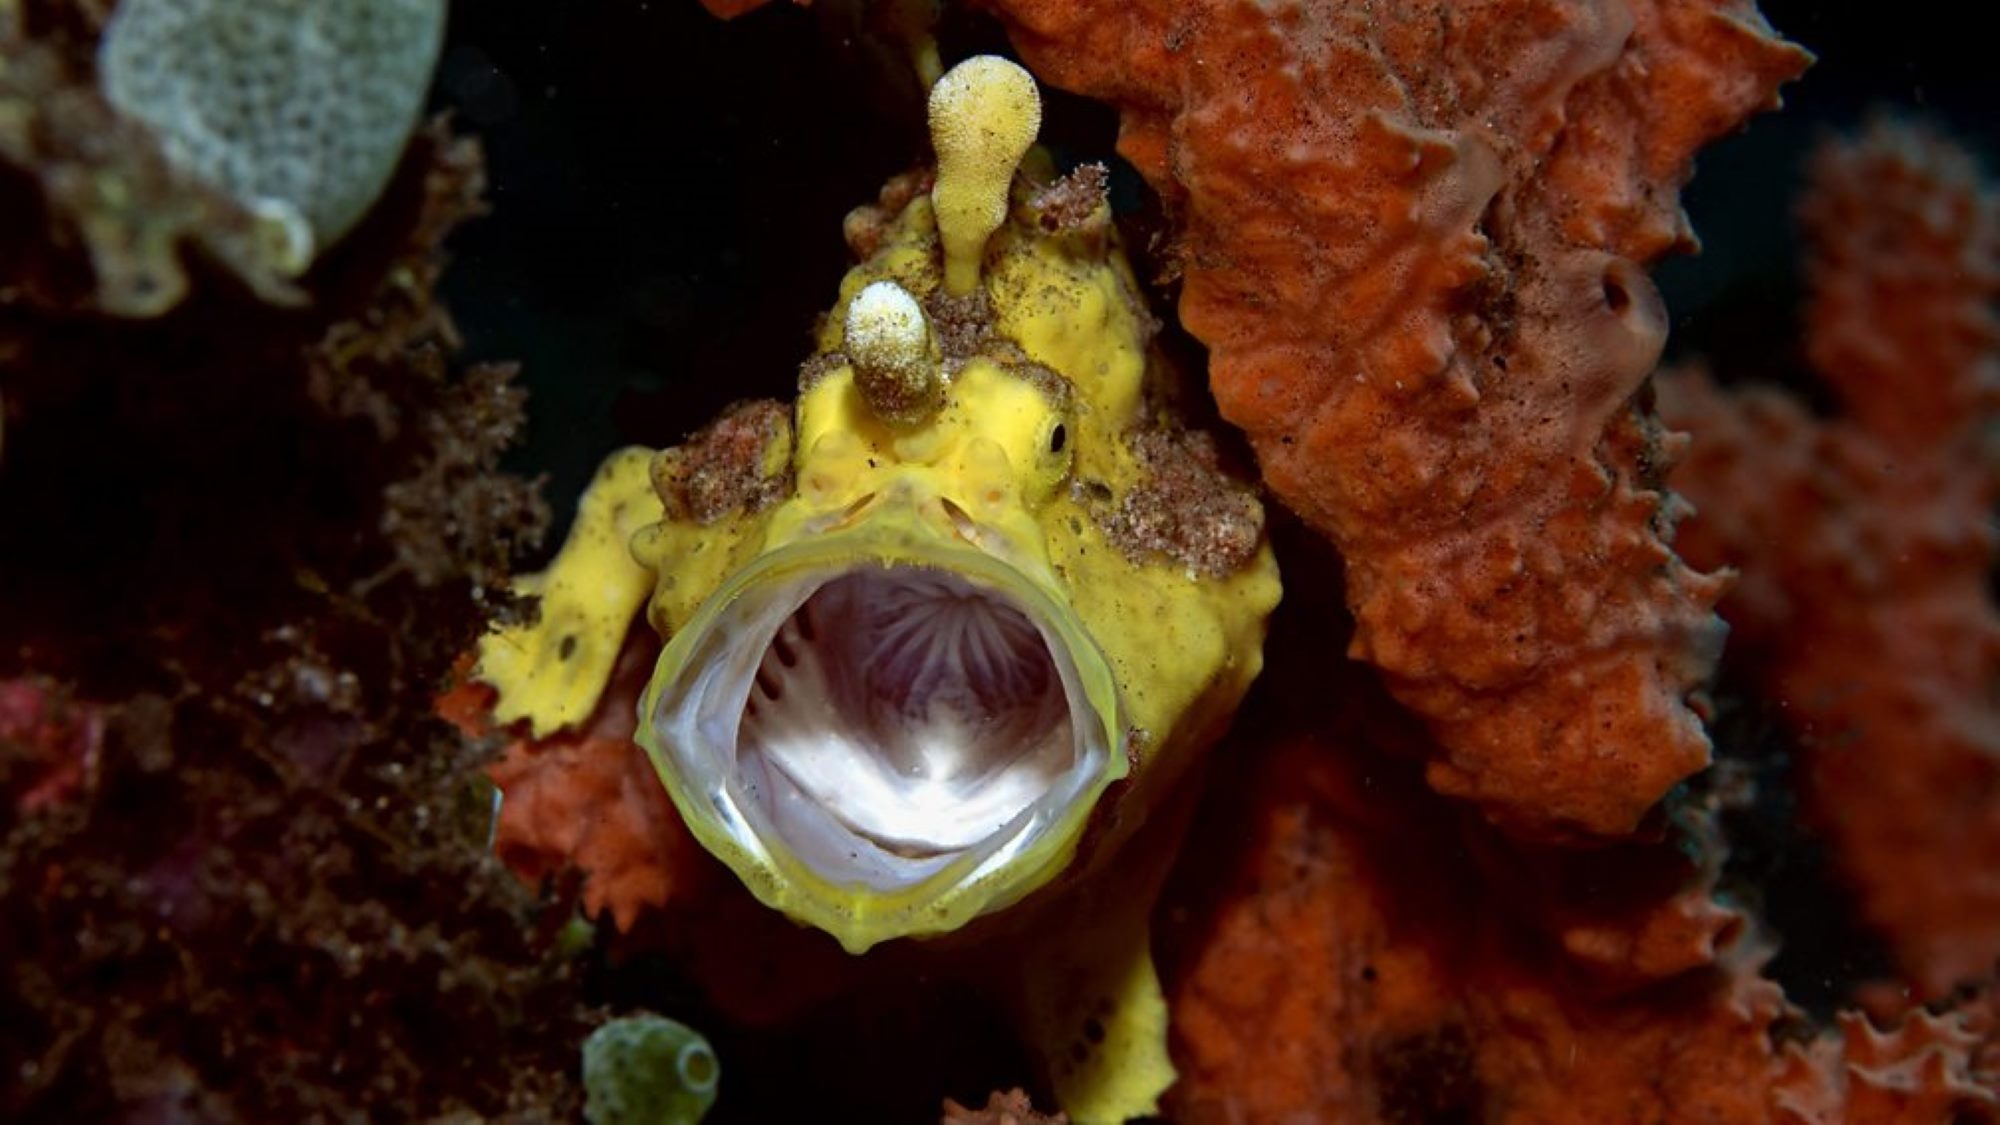 A yellow Clown frogfish yawning on the house reef of Atmosphere Resorts & Spa in Dauin Philippines. Featured on BBC's Planet Earth III 